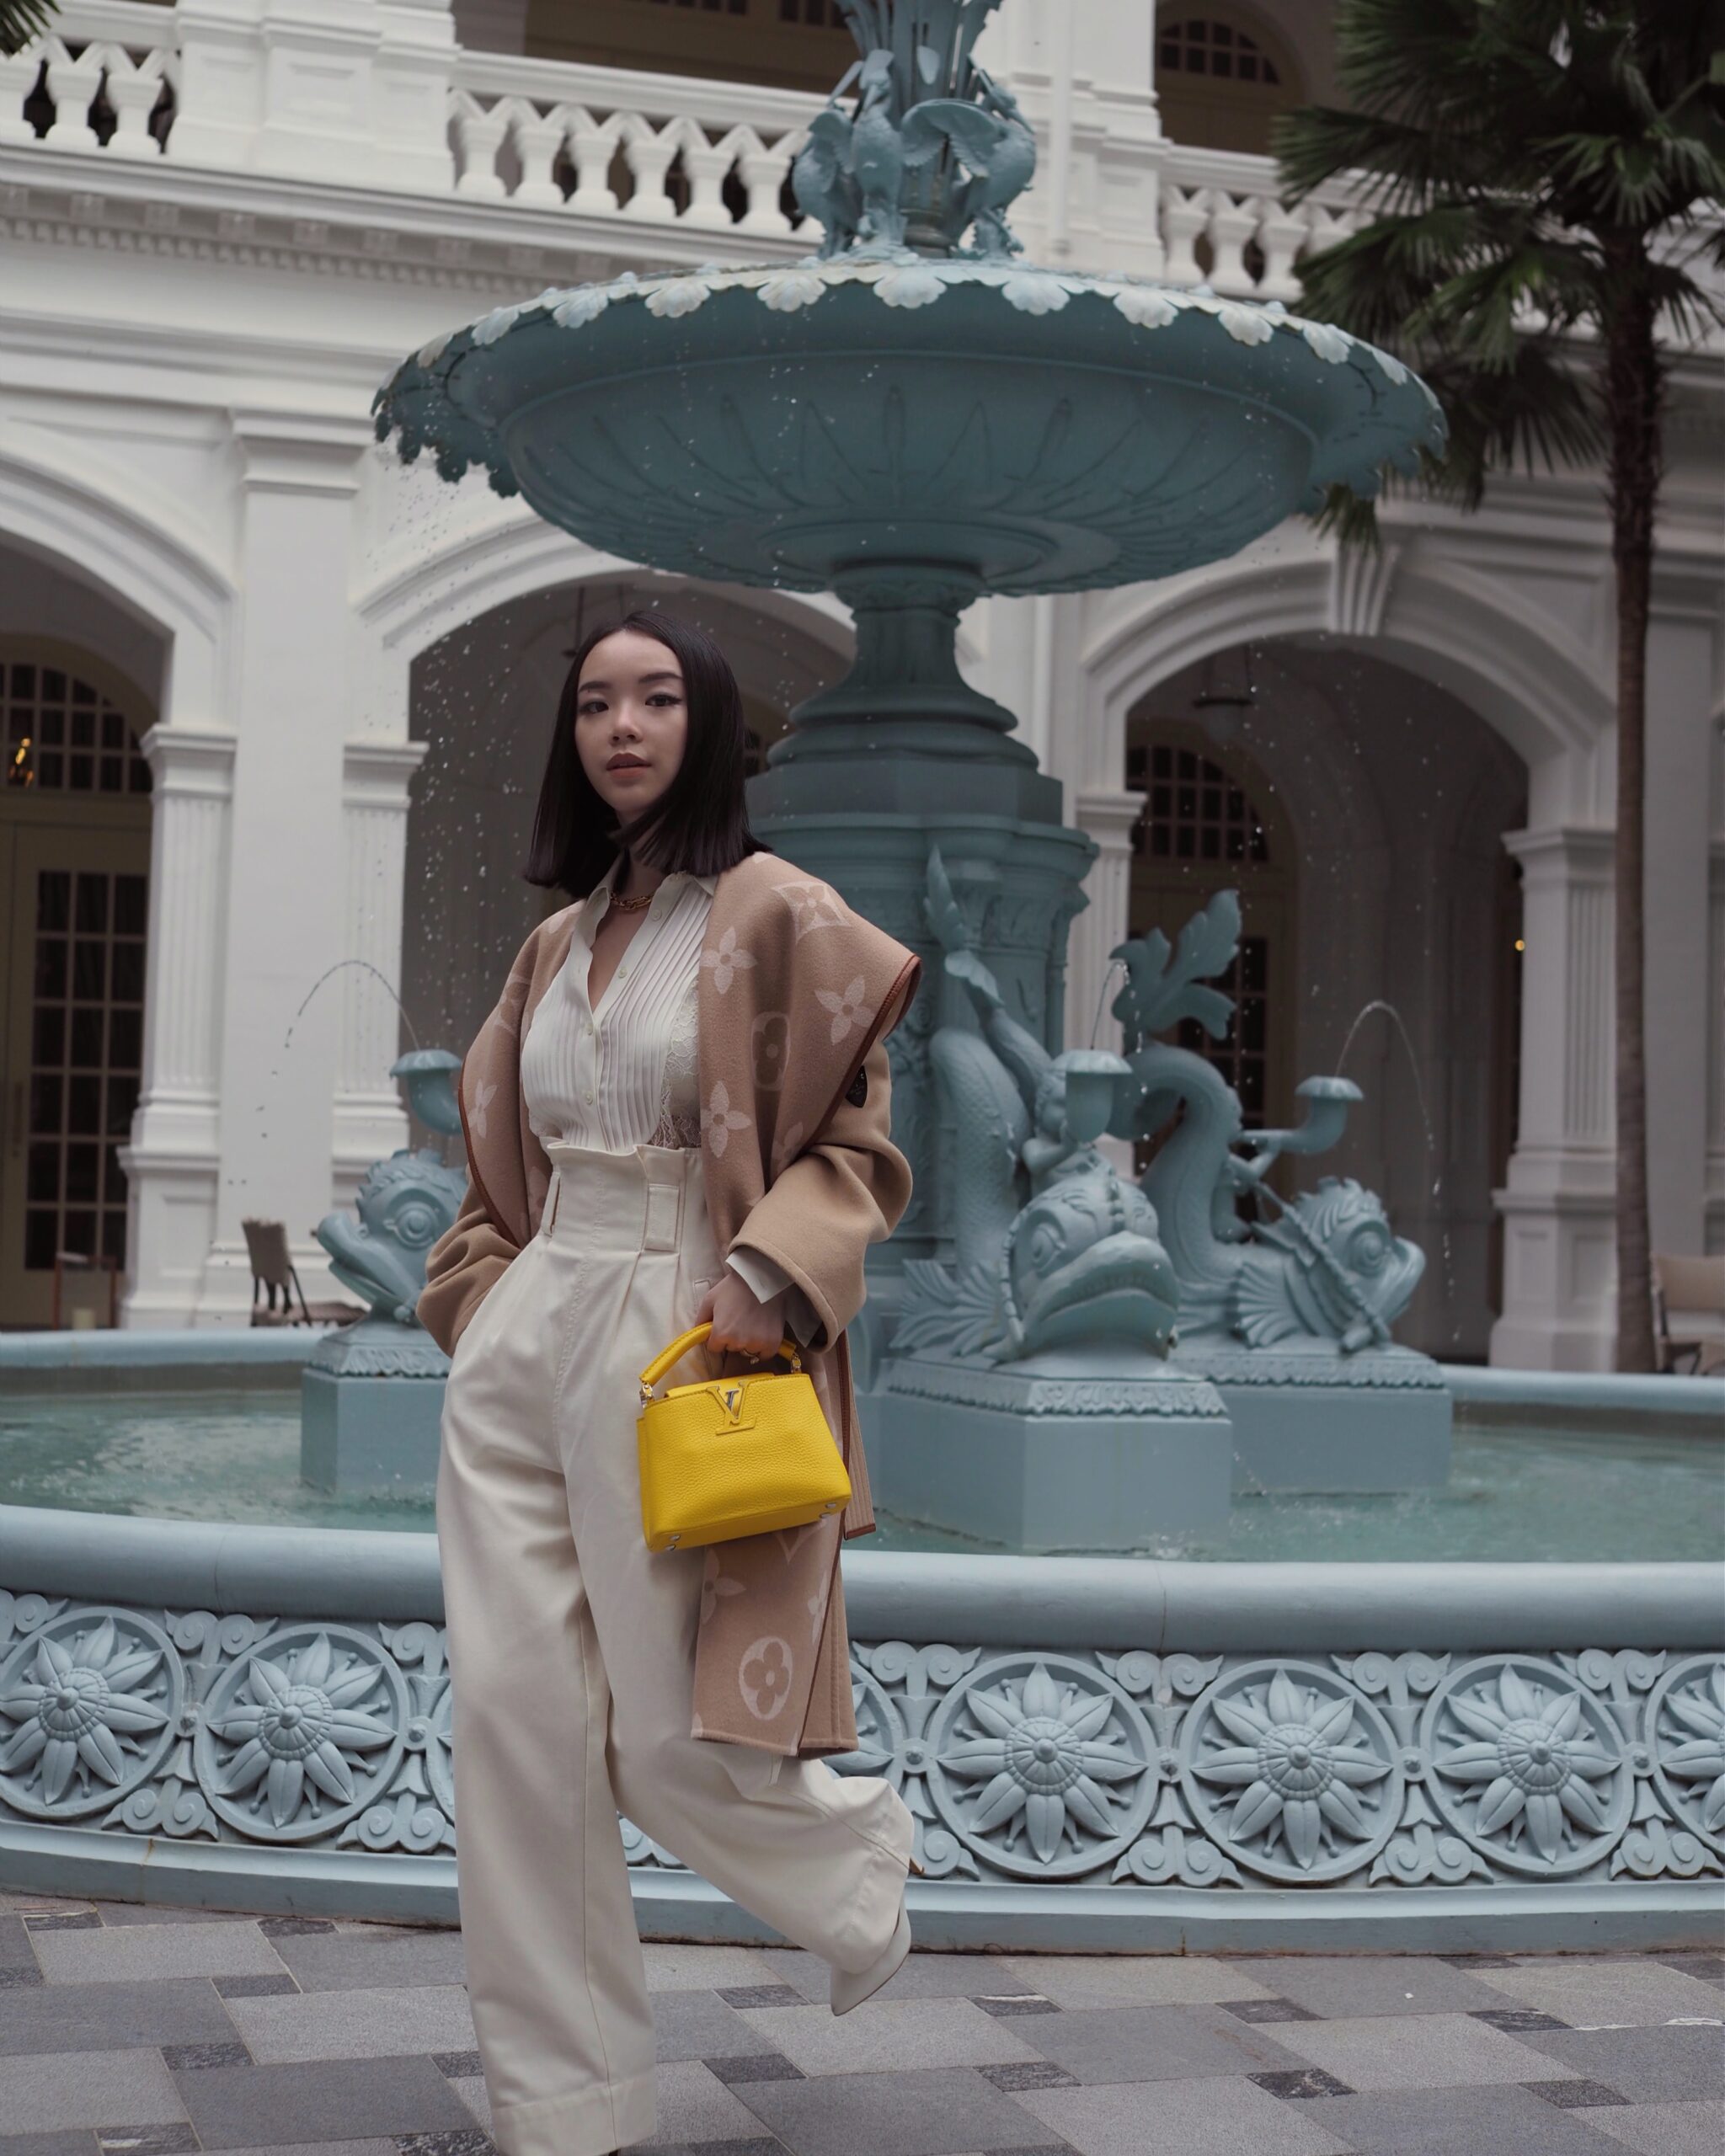 Singapore Fashion Blogger and Digital Creative Willabelle Ong @willamazing wearing Louis Vuitton giant monogram jacquard wrap coat and LV Capucines bag in Bouton d’Or Yellow